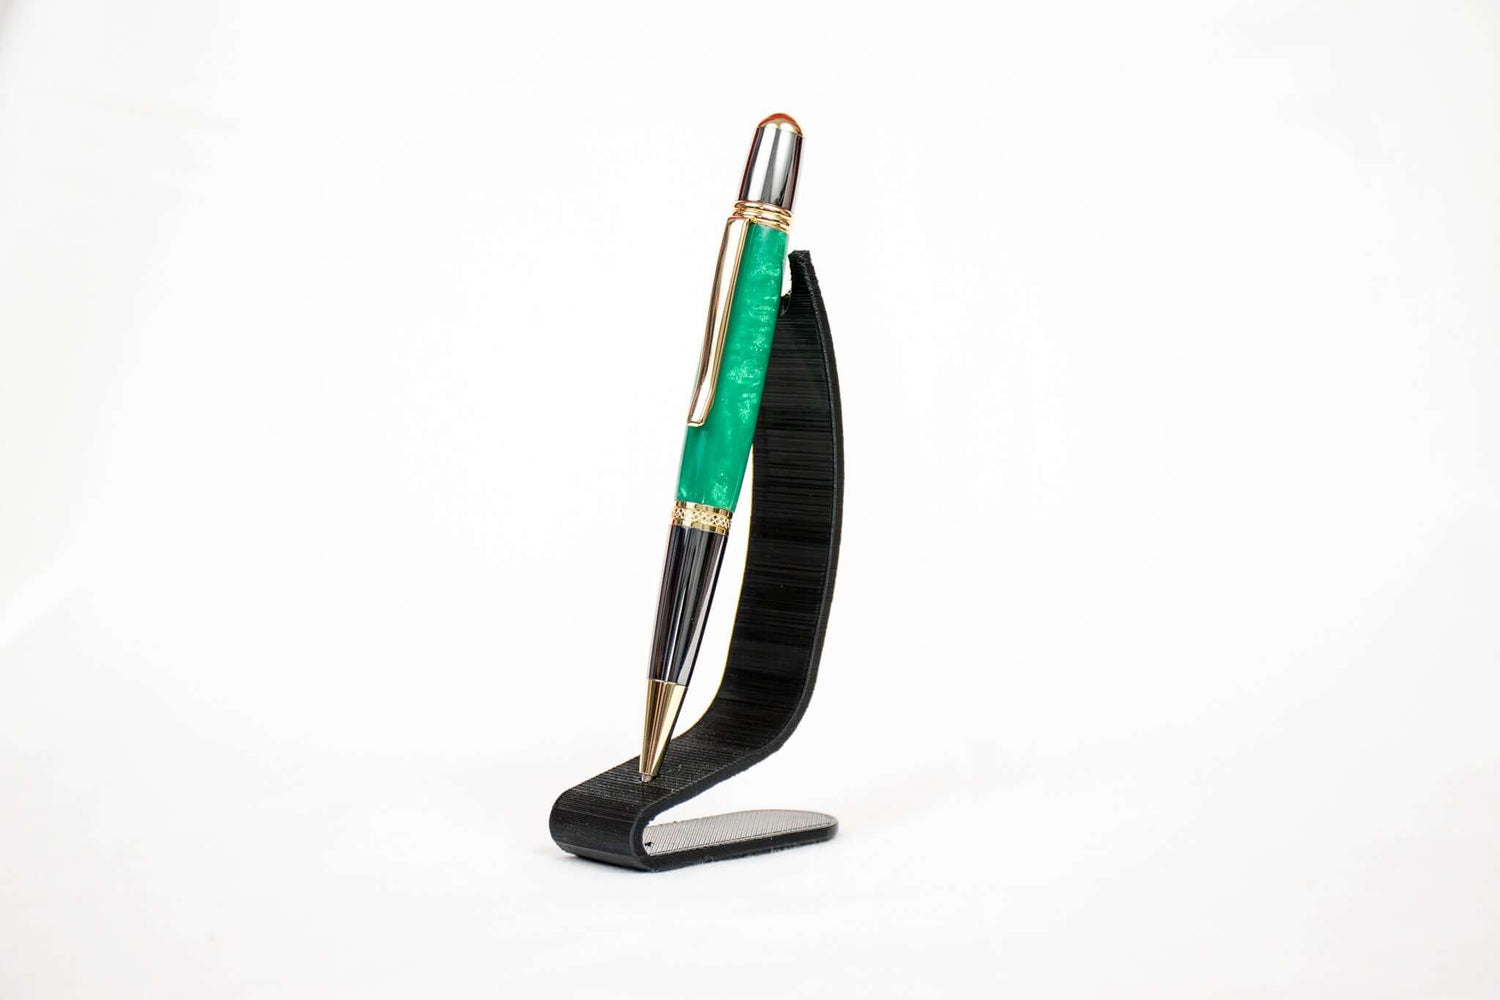 A handmade green resin twist pen with gold and gun metal plating on a black stand